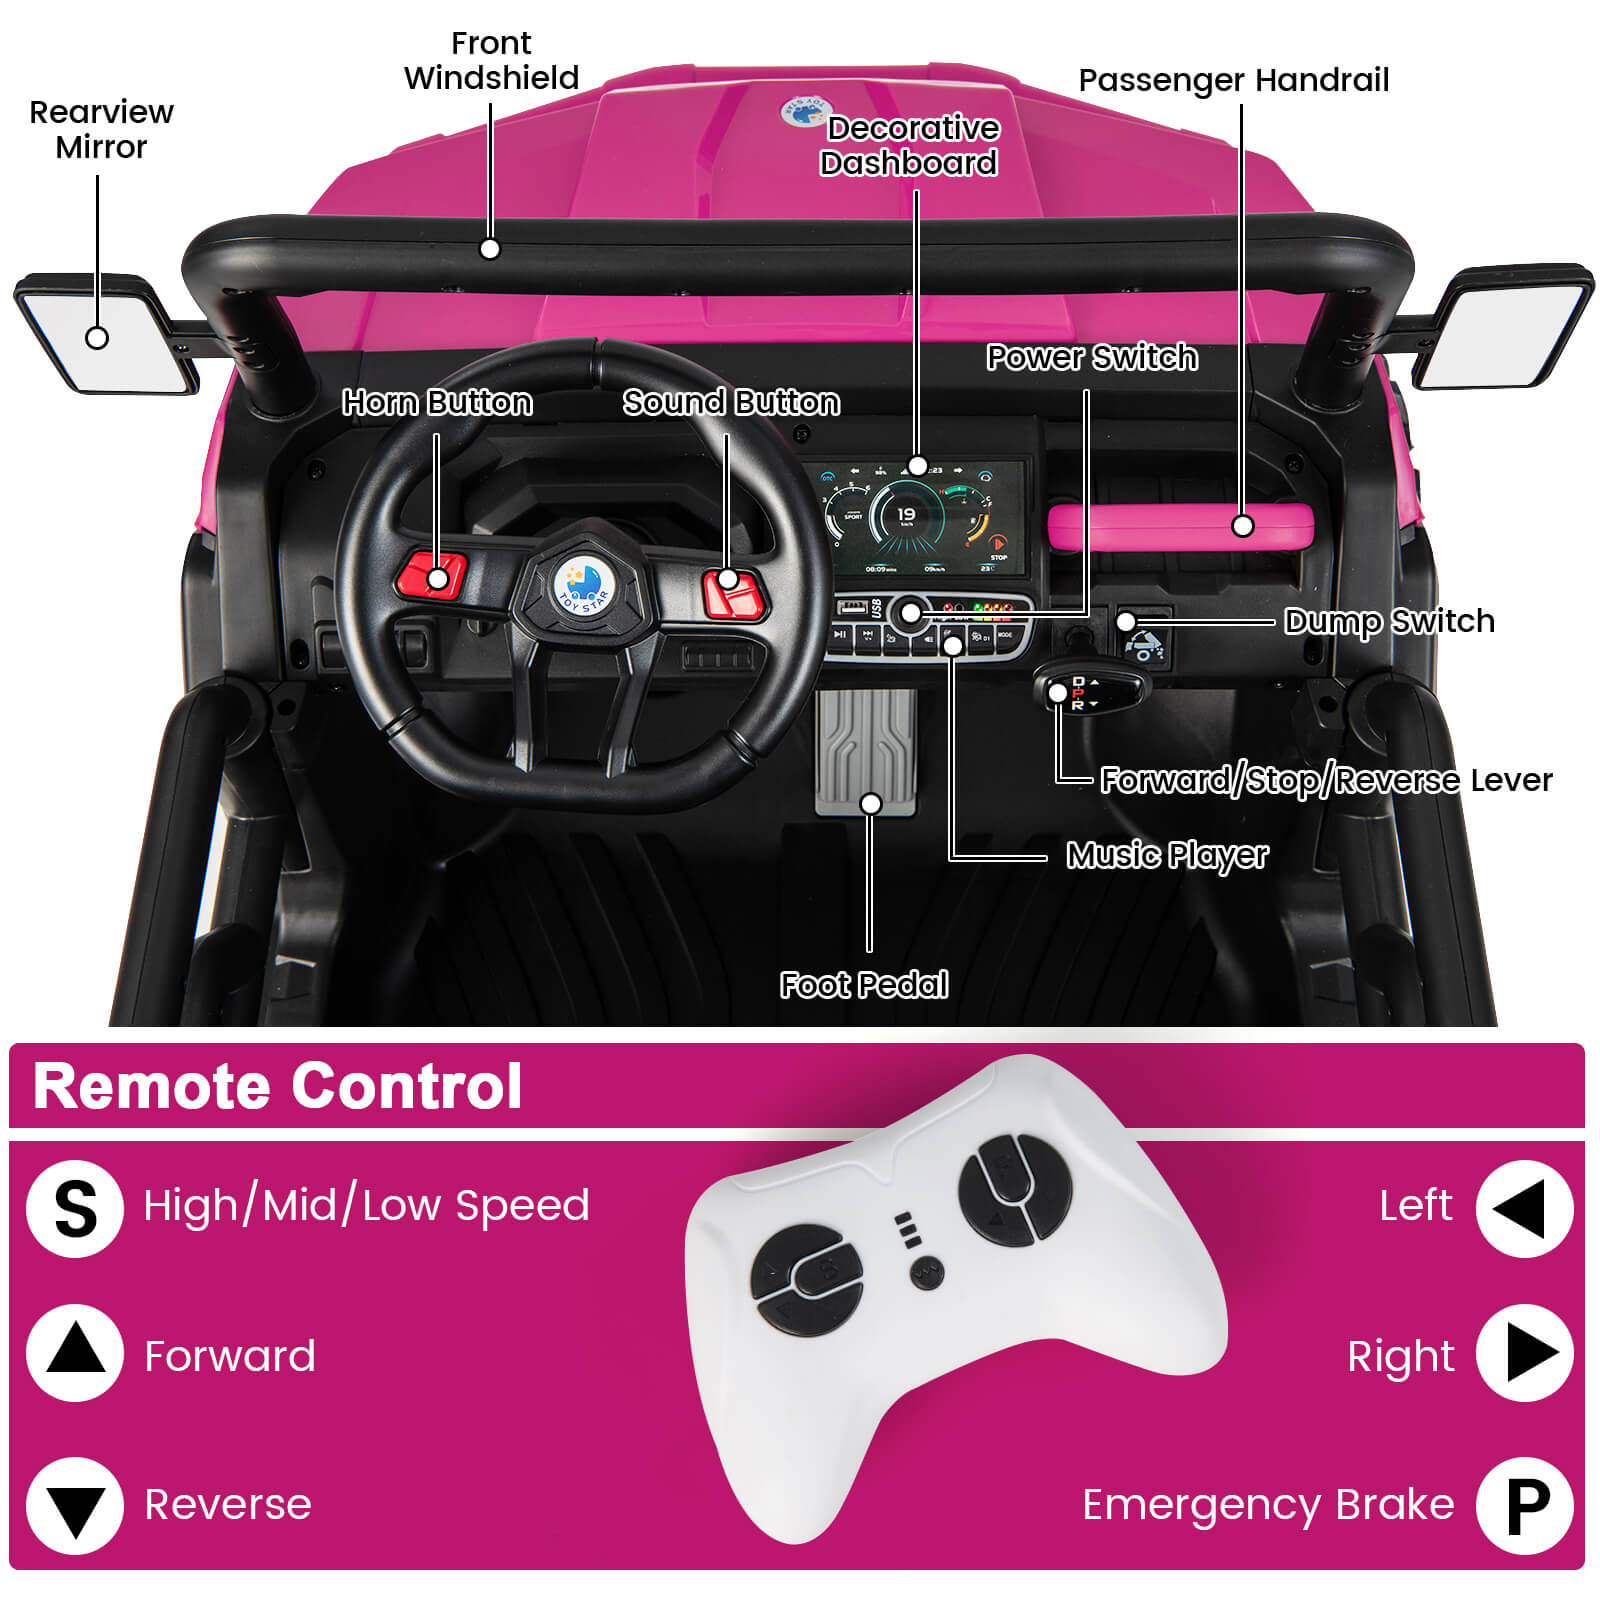 Two driving modes for ultimate control: With the included 2.4GHz remote control, parents can efficiently steer the kids' ride-on tractor while fostering interactive play. Alternatively, the one-start button, forward/stop/reverse lever, and foot pedal give your kid a realistic driving experience.